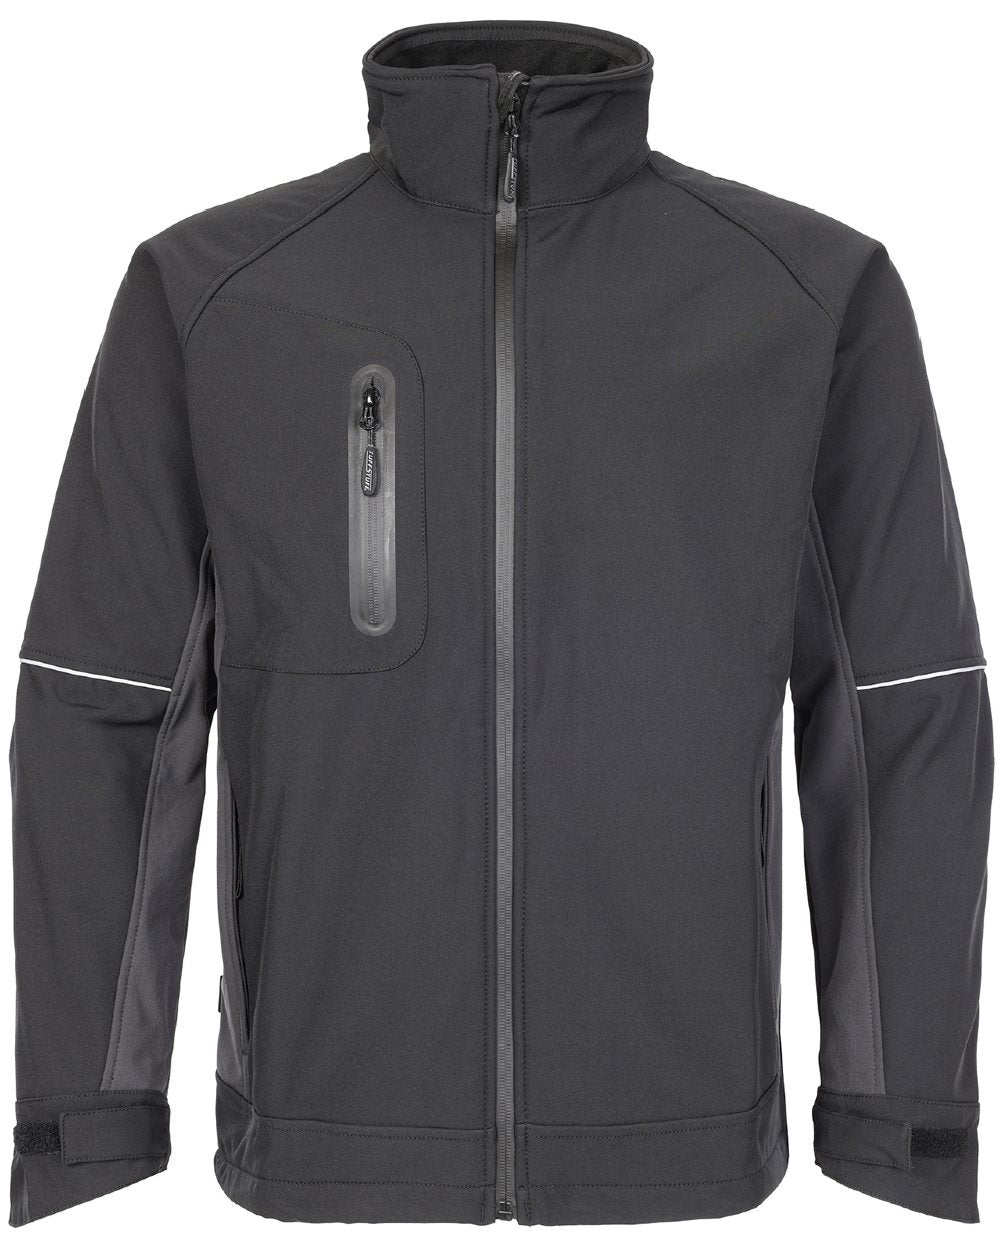 Black Coloured TuffStuff Stanton Waterproof Softshell Jacket On A White Background 